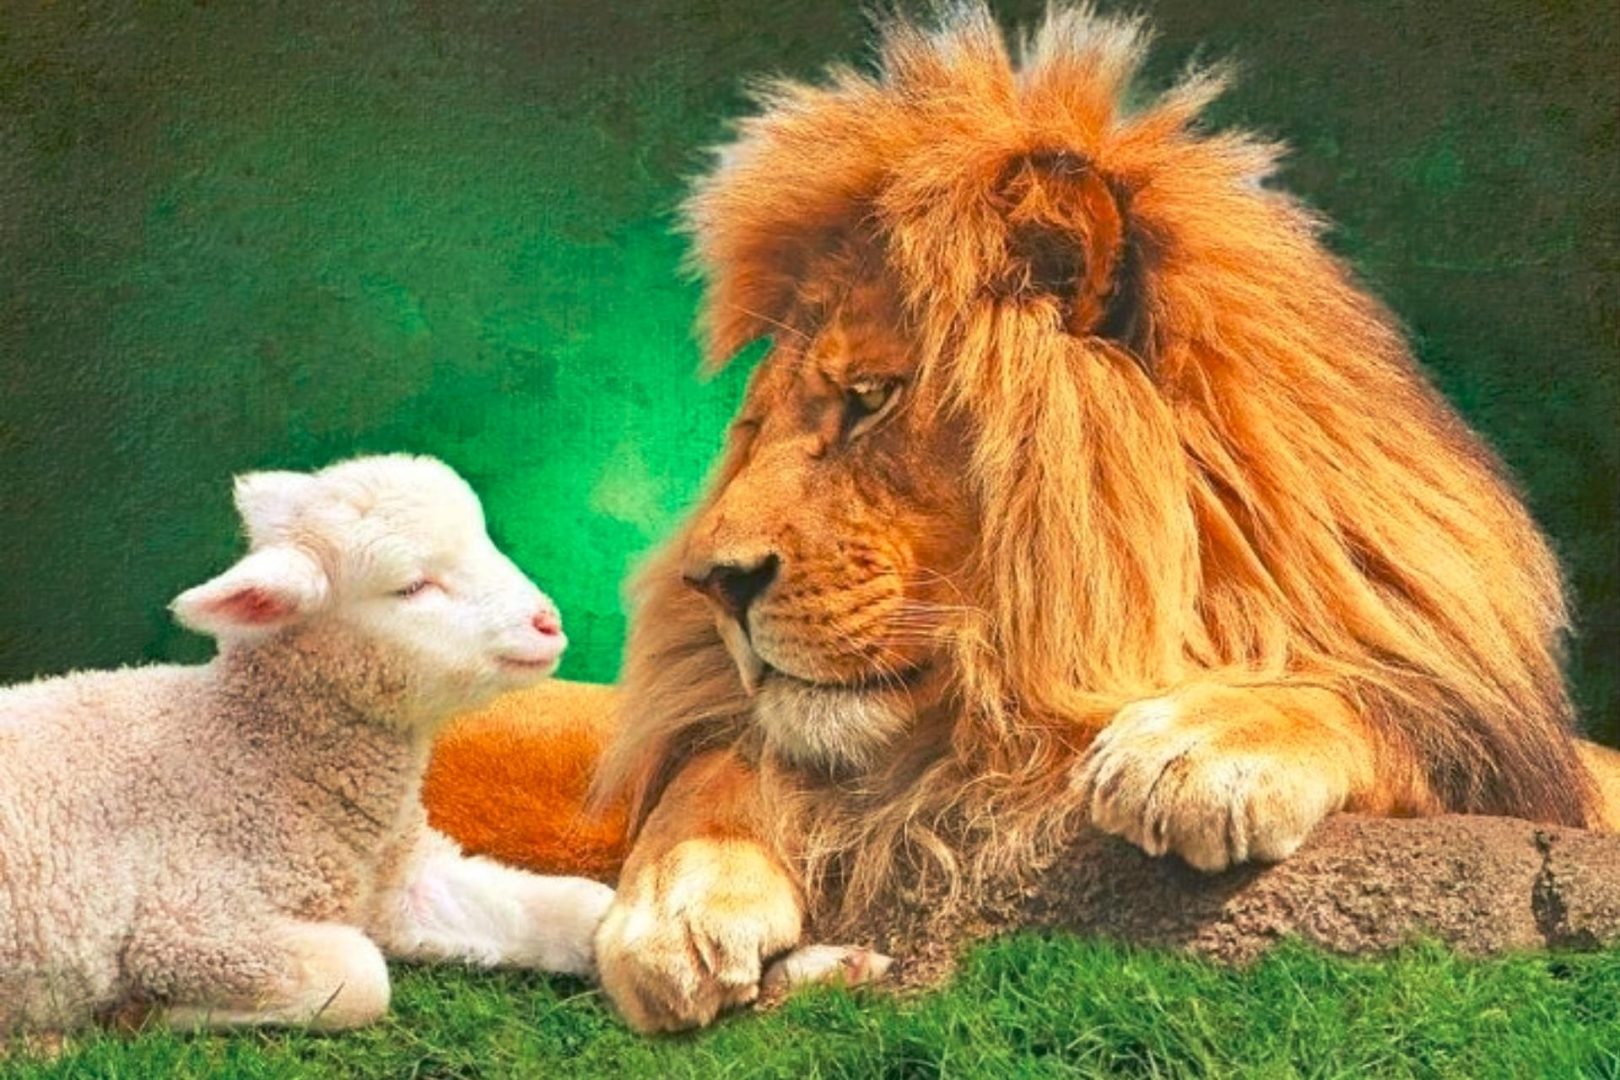 A picture of a lion and a lamb lying on the grass together.